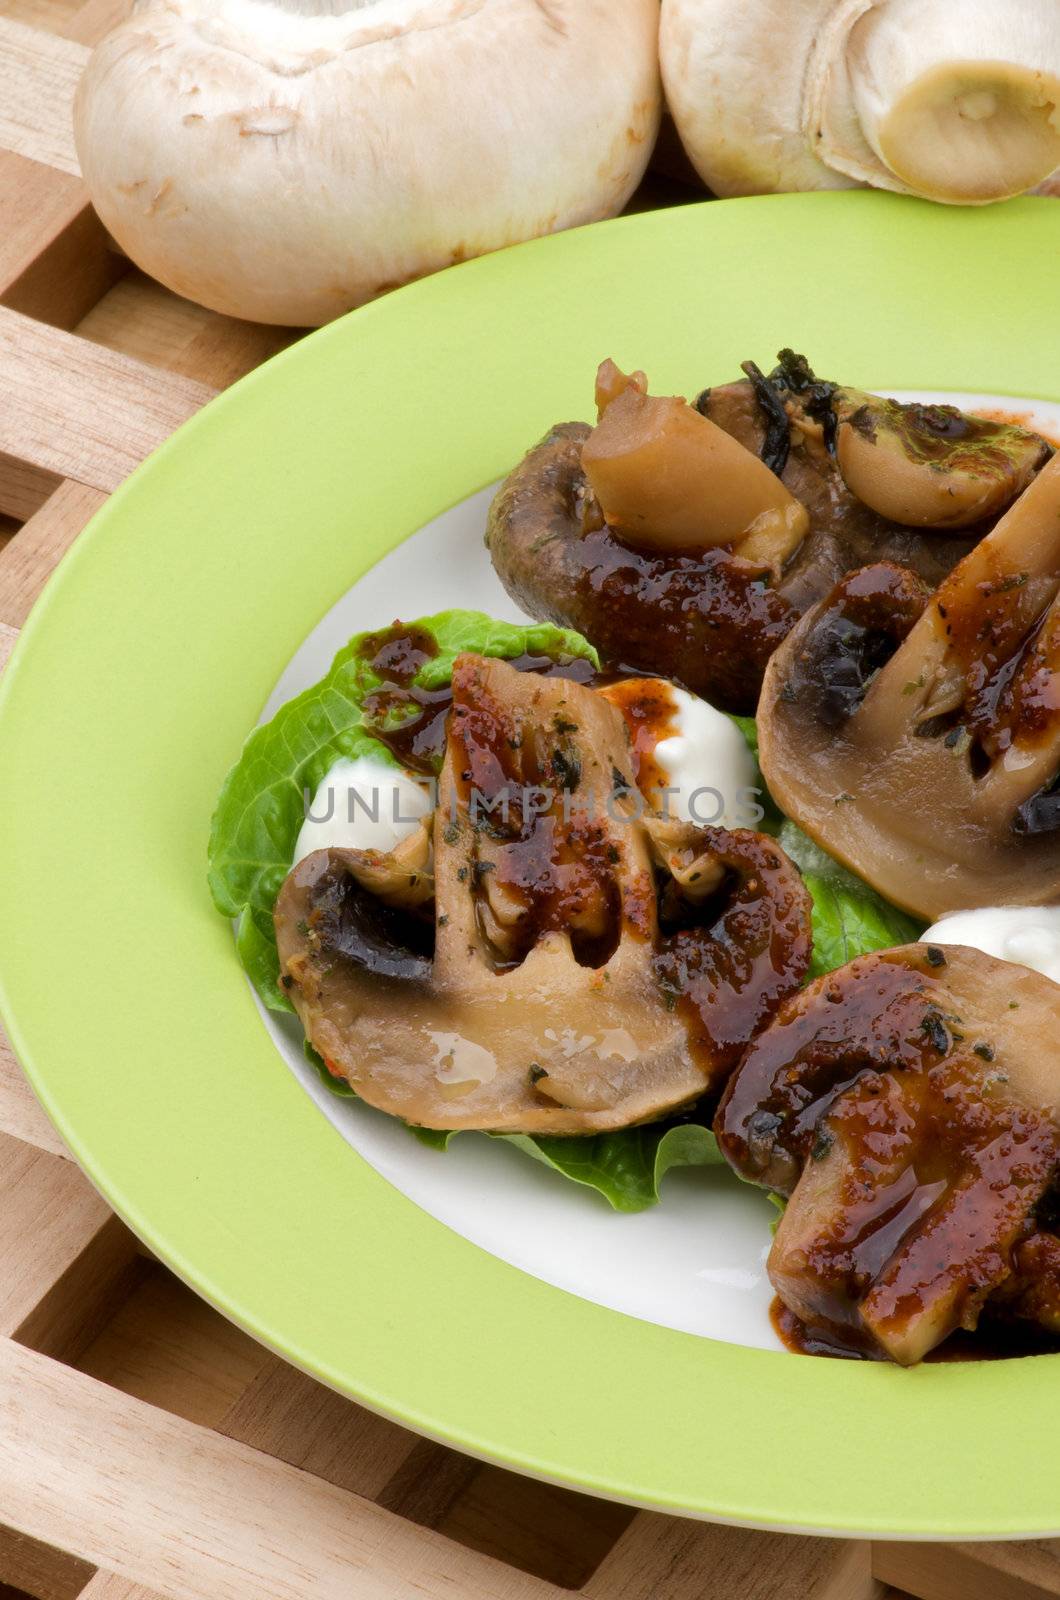 Cooked Mushrooms with Grill Sauce, Sour Cream and Greens on Plate closeup on Wood background and Raw Mushrooms 